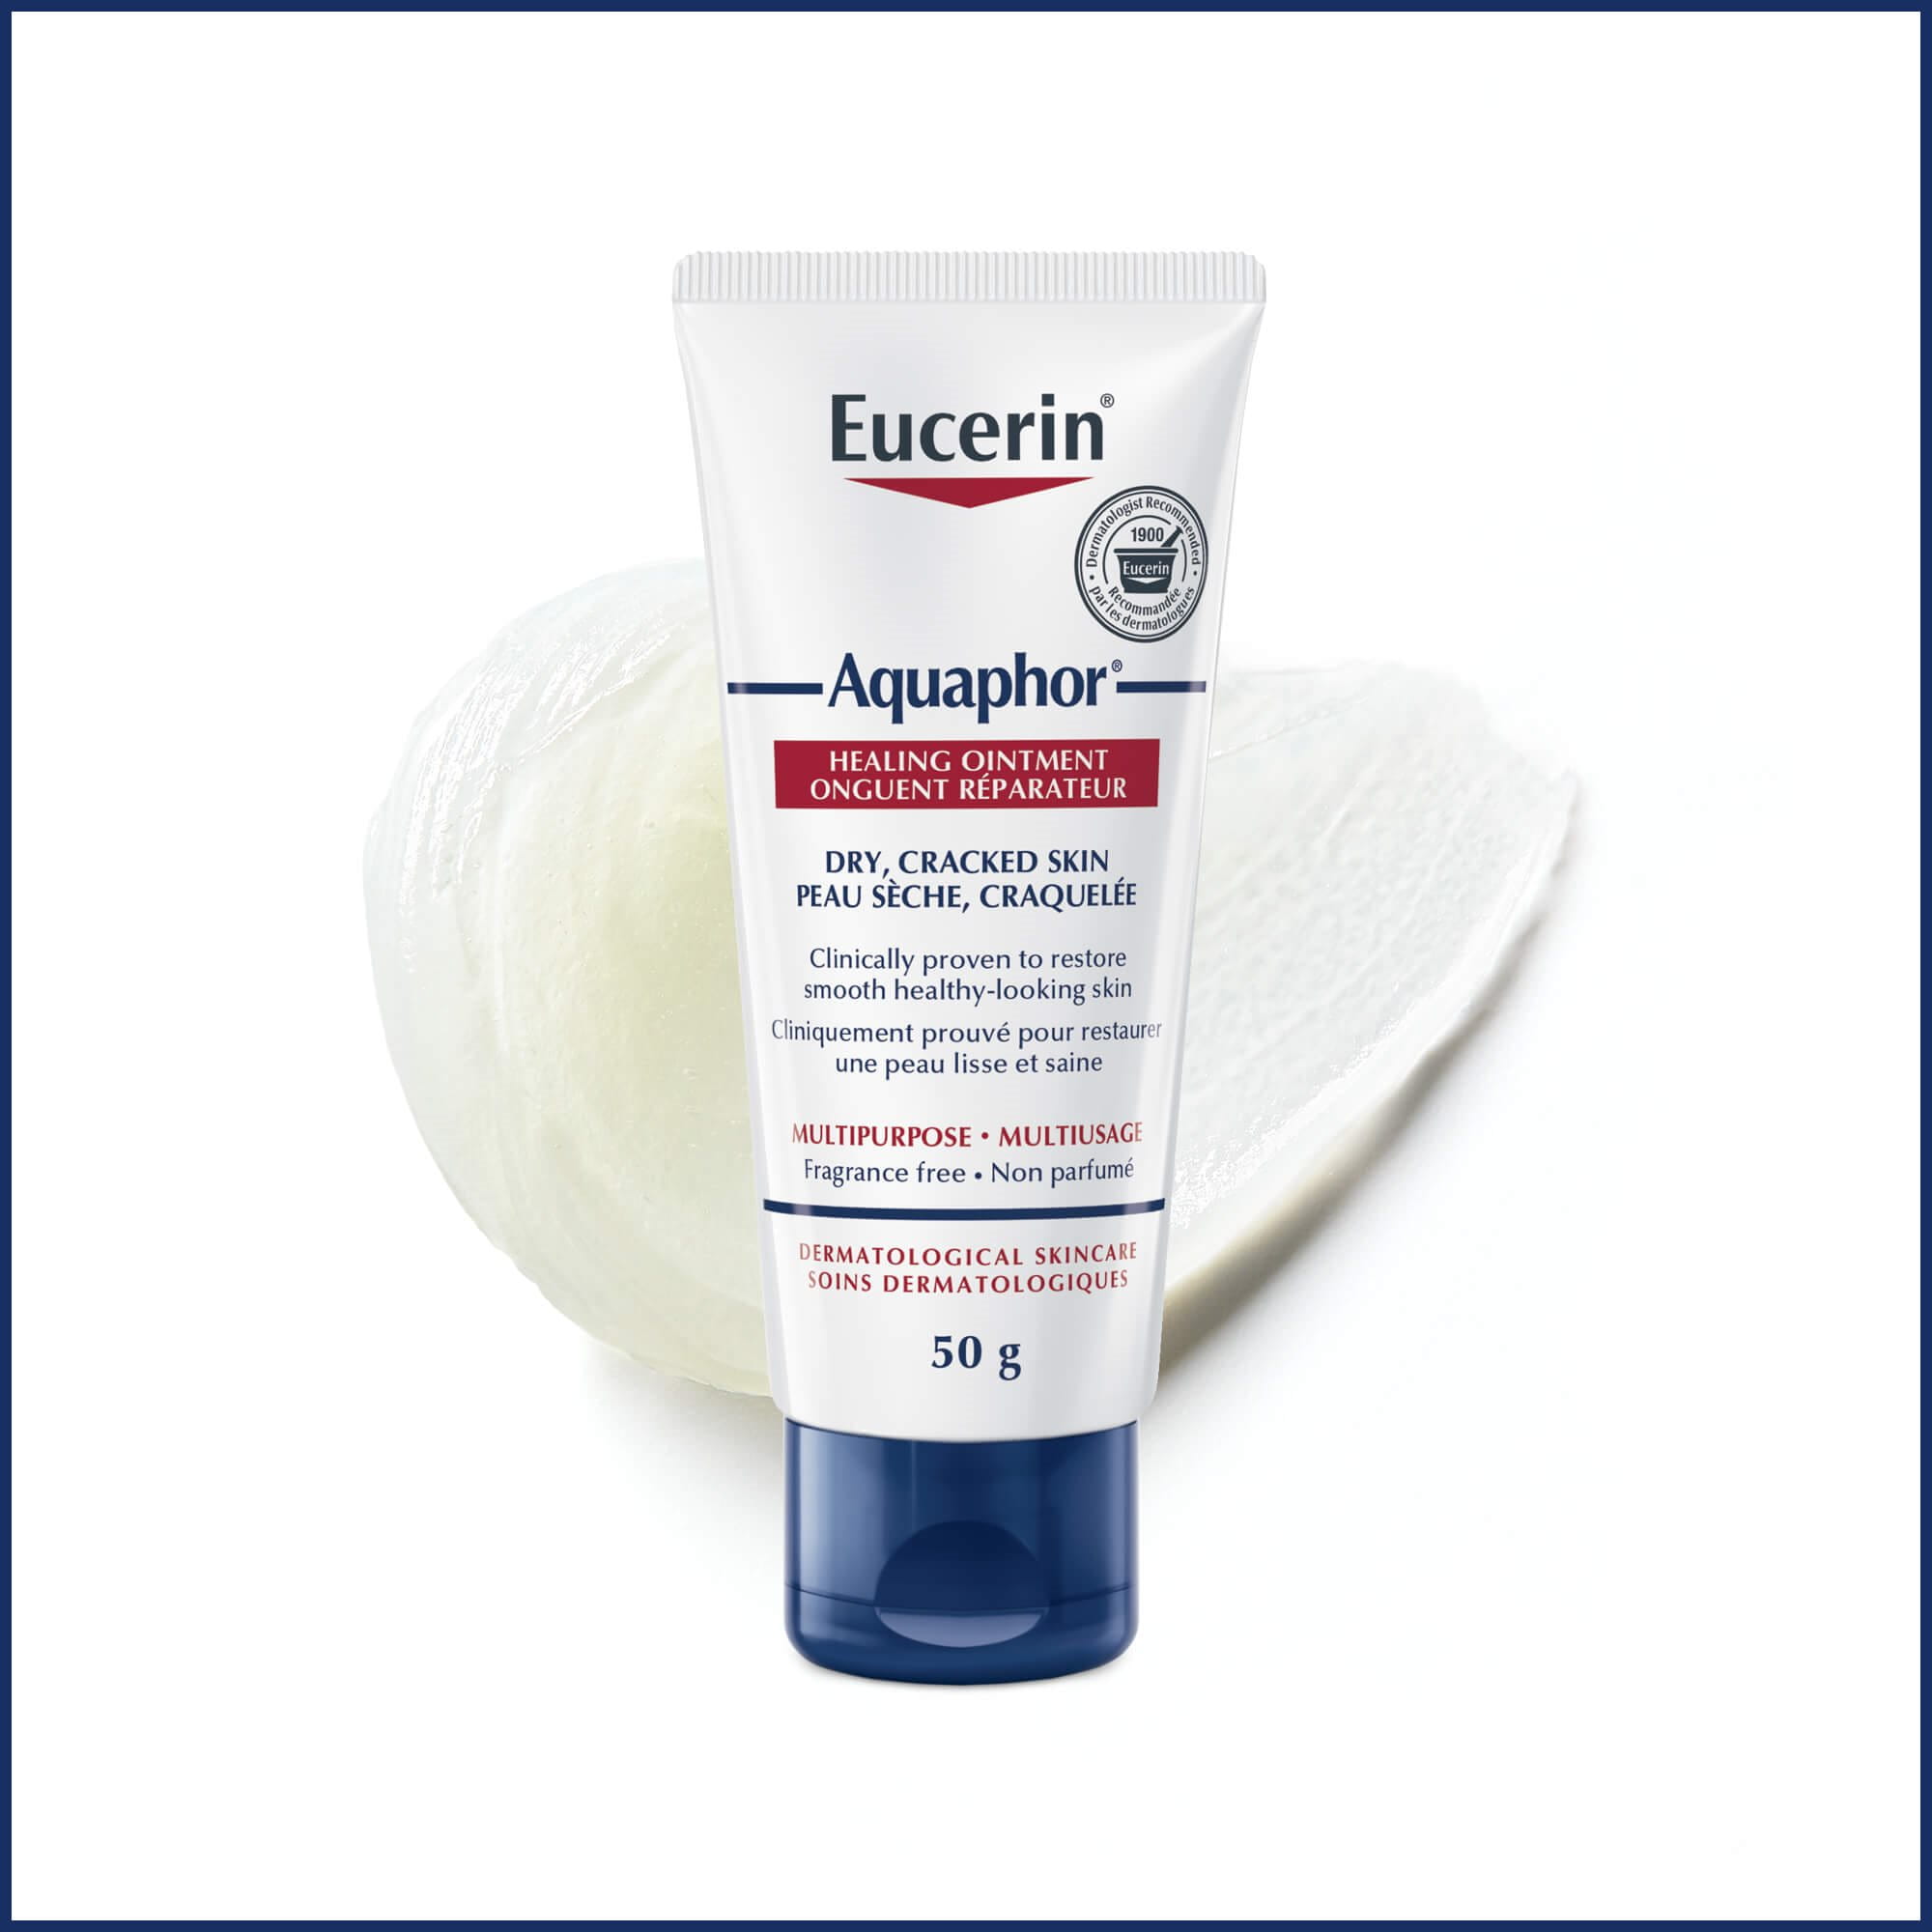 Close up of a 50g Eucerin Aquaphor healing ointment tube against a white background with product texture